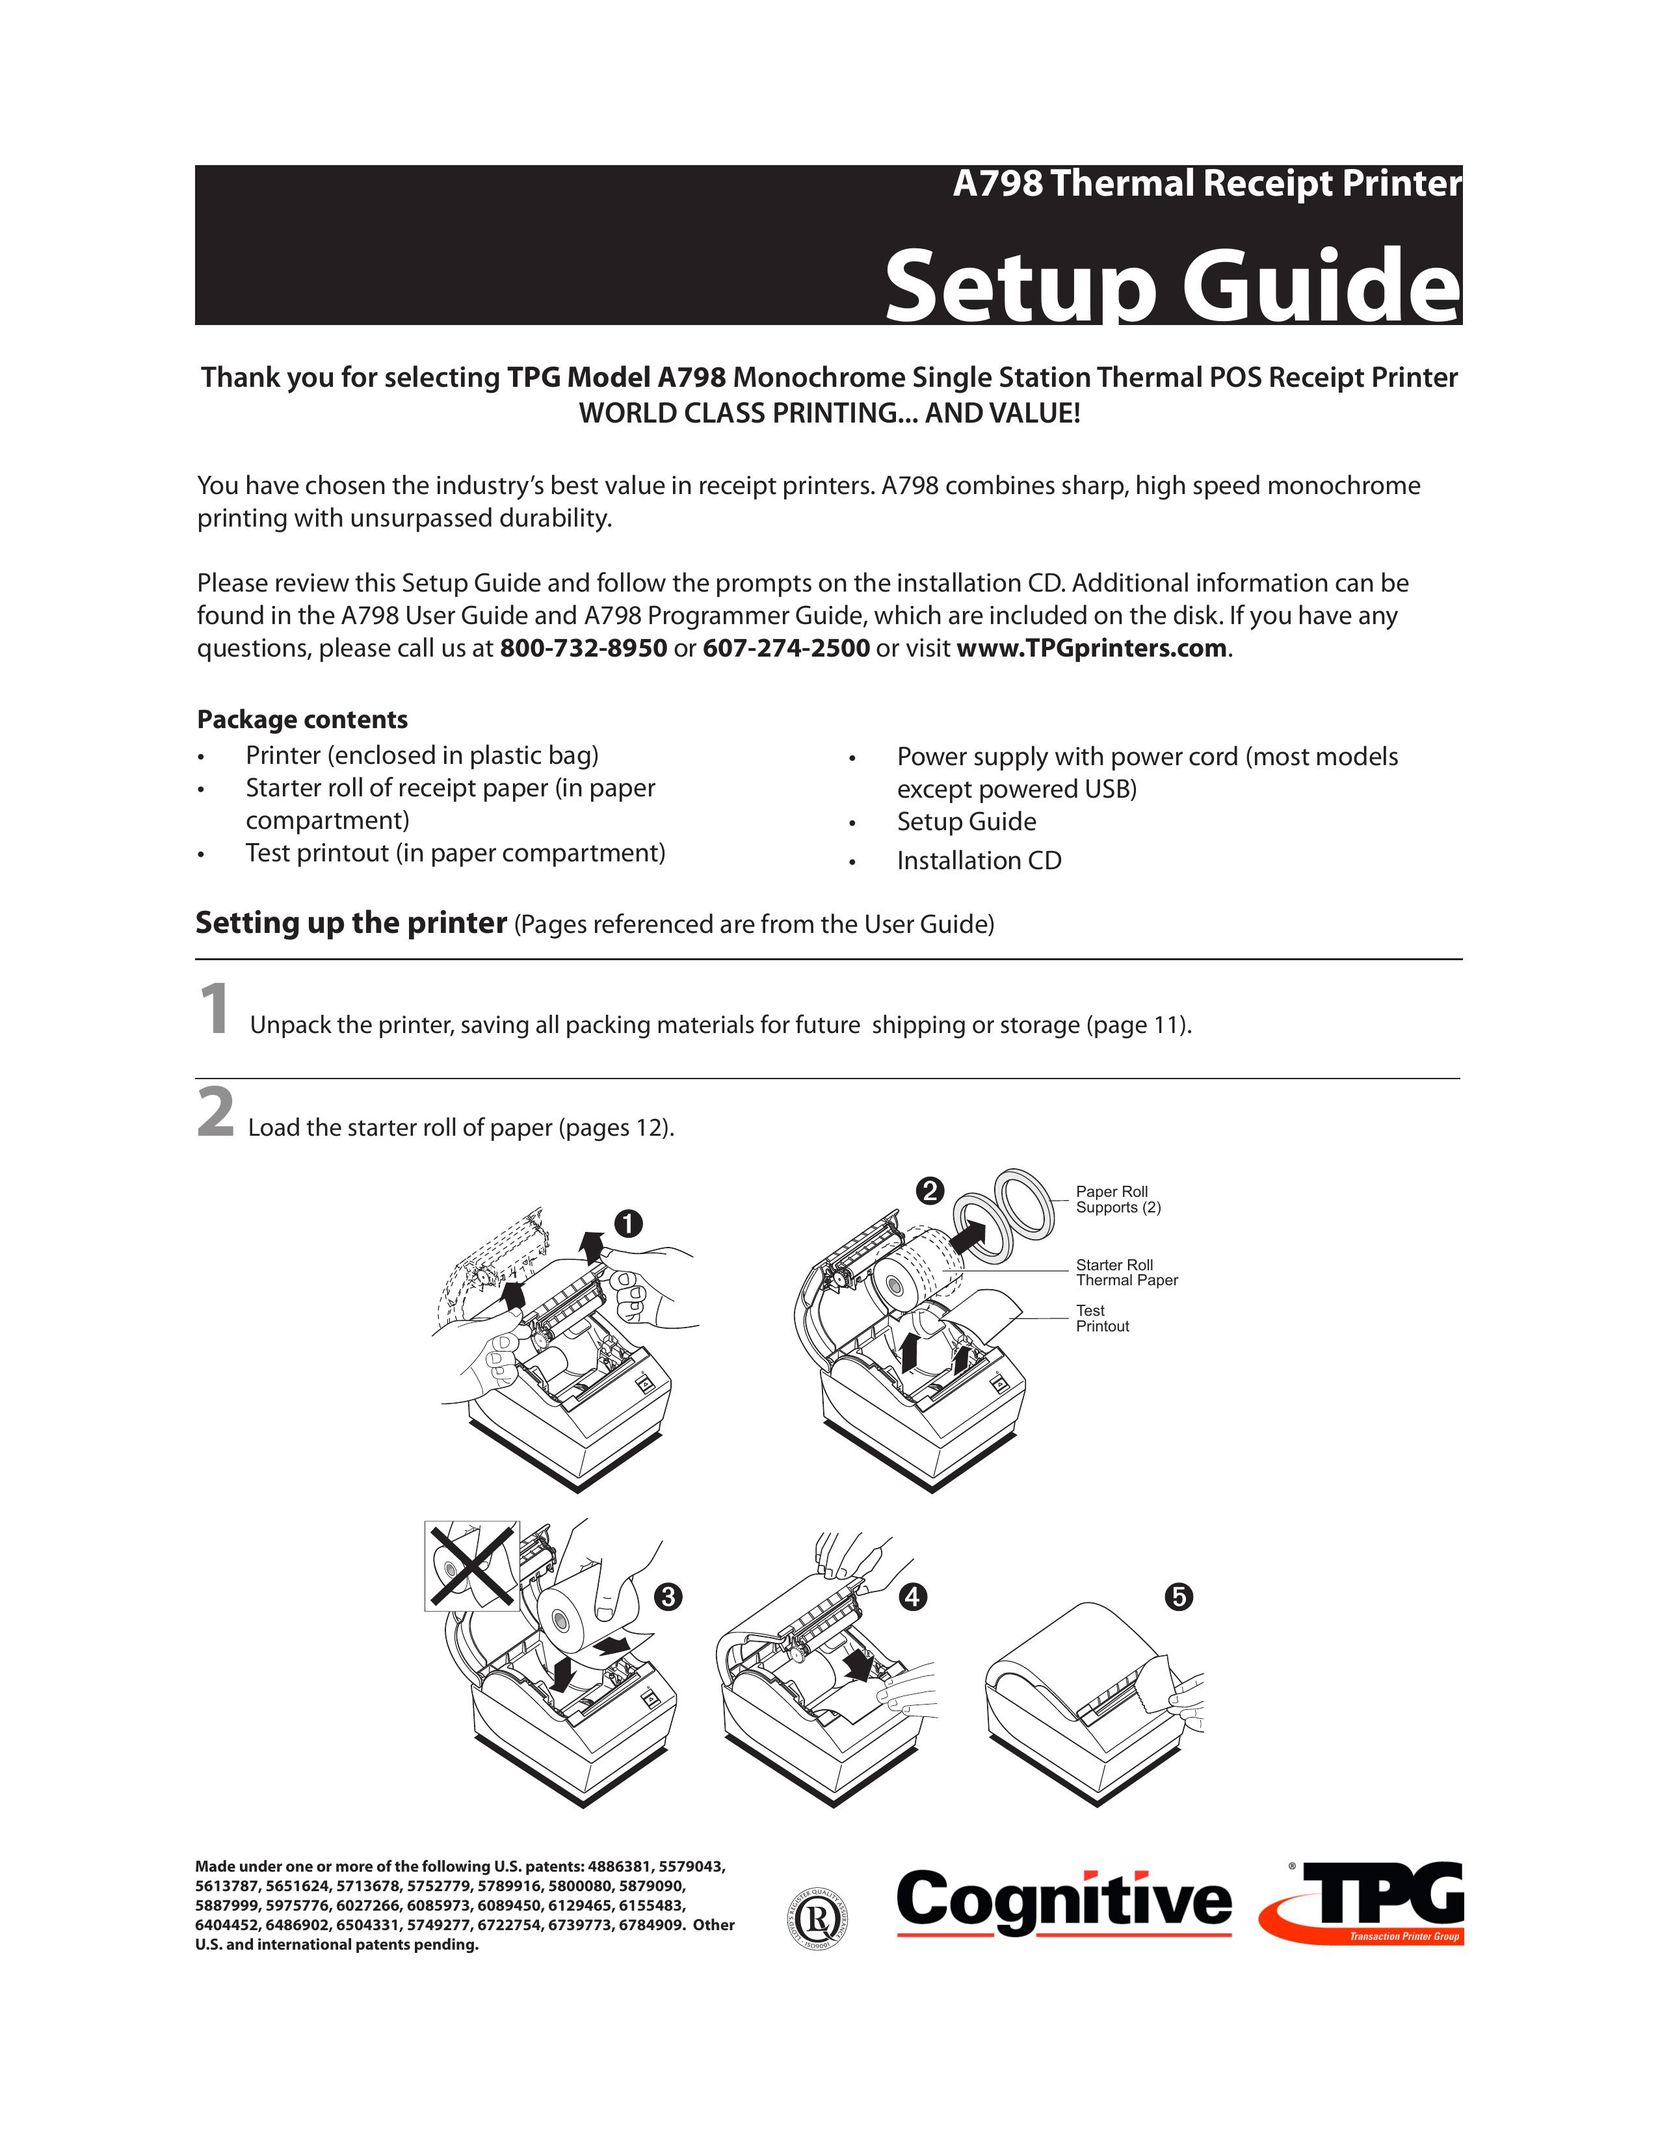 Cognitive Solutions A798 Printer User Manual